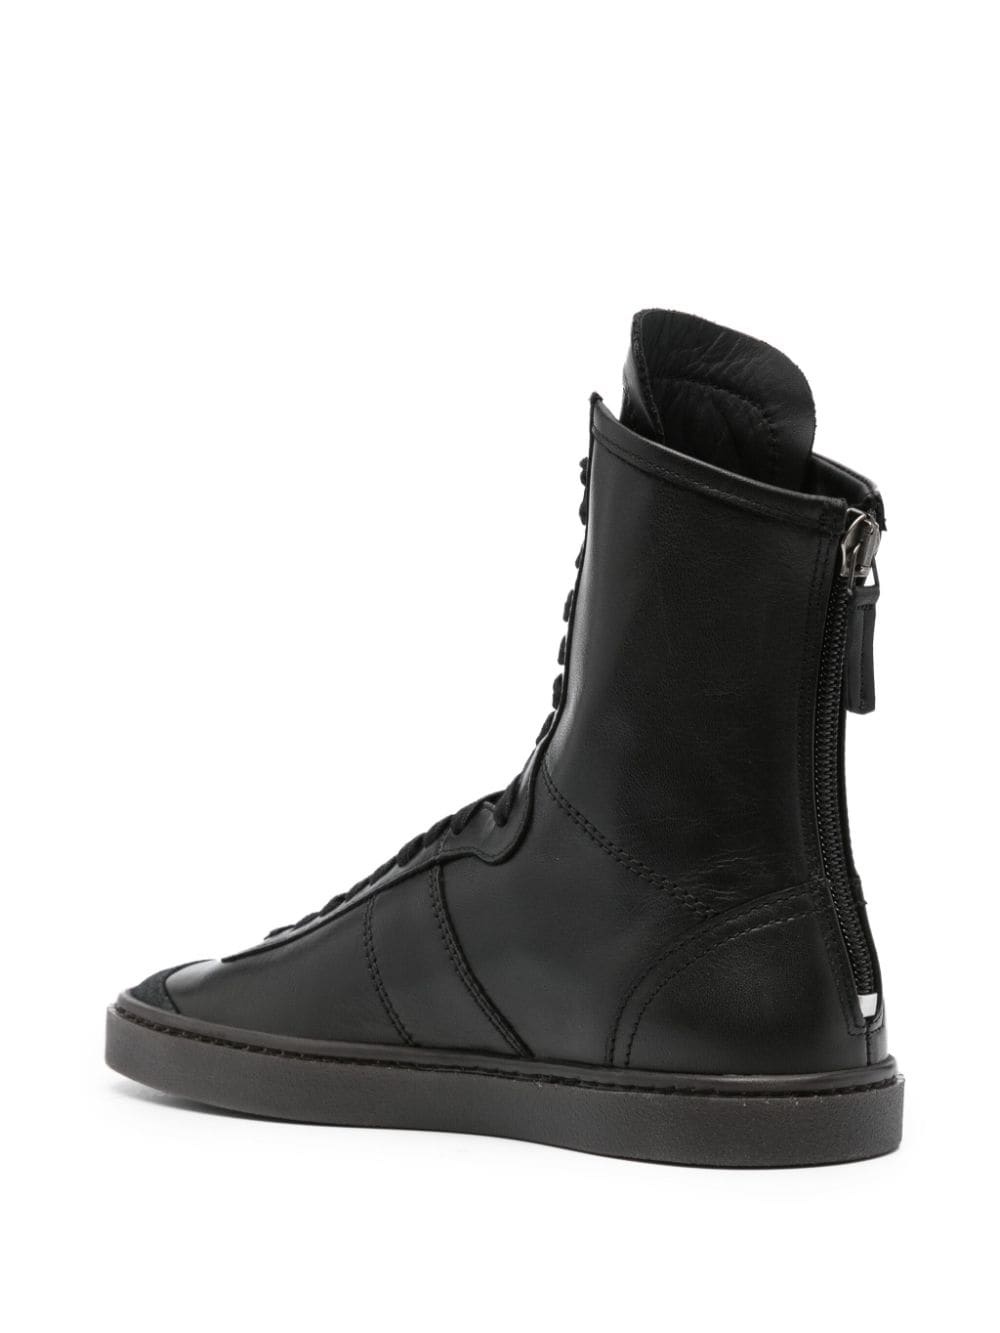 high-top leather sneakers - 3